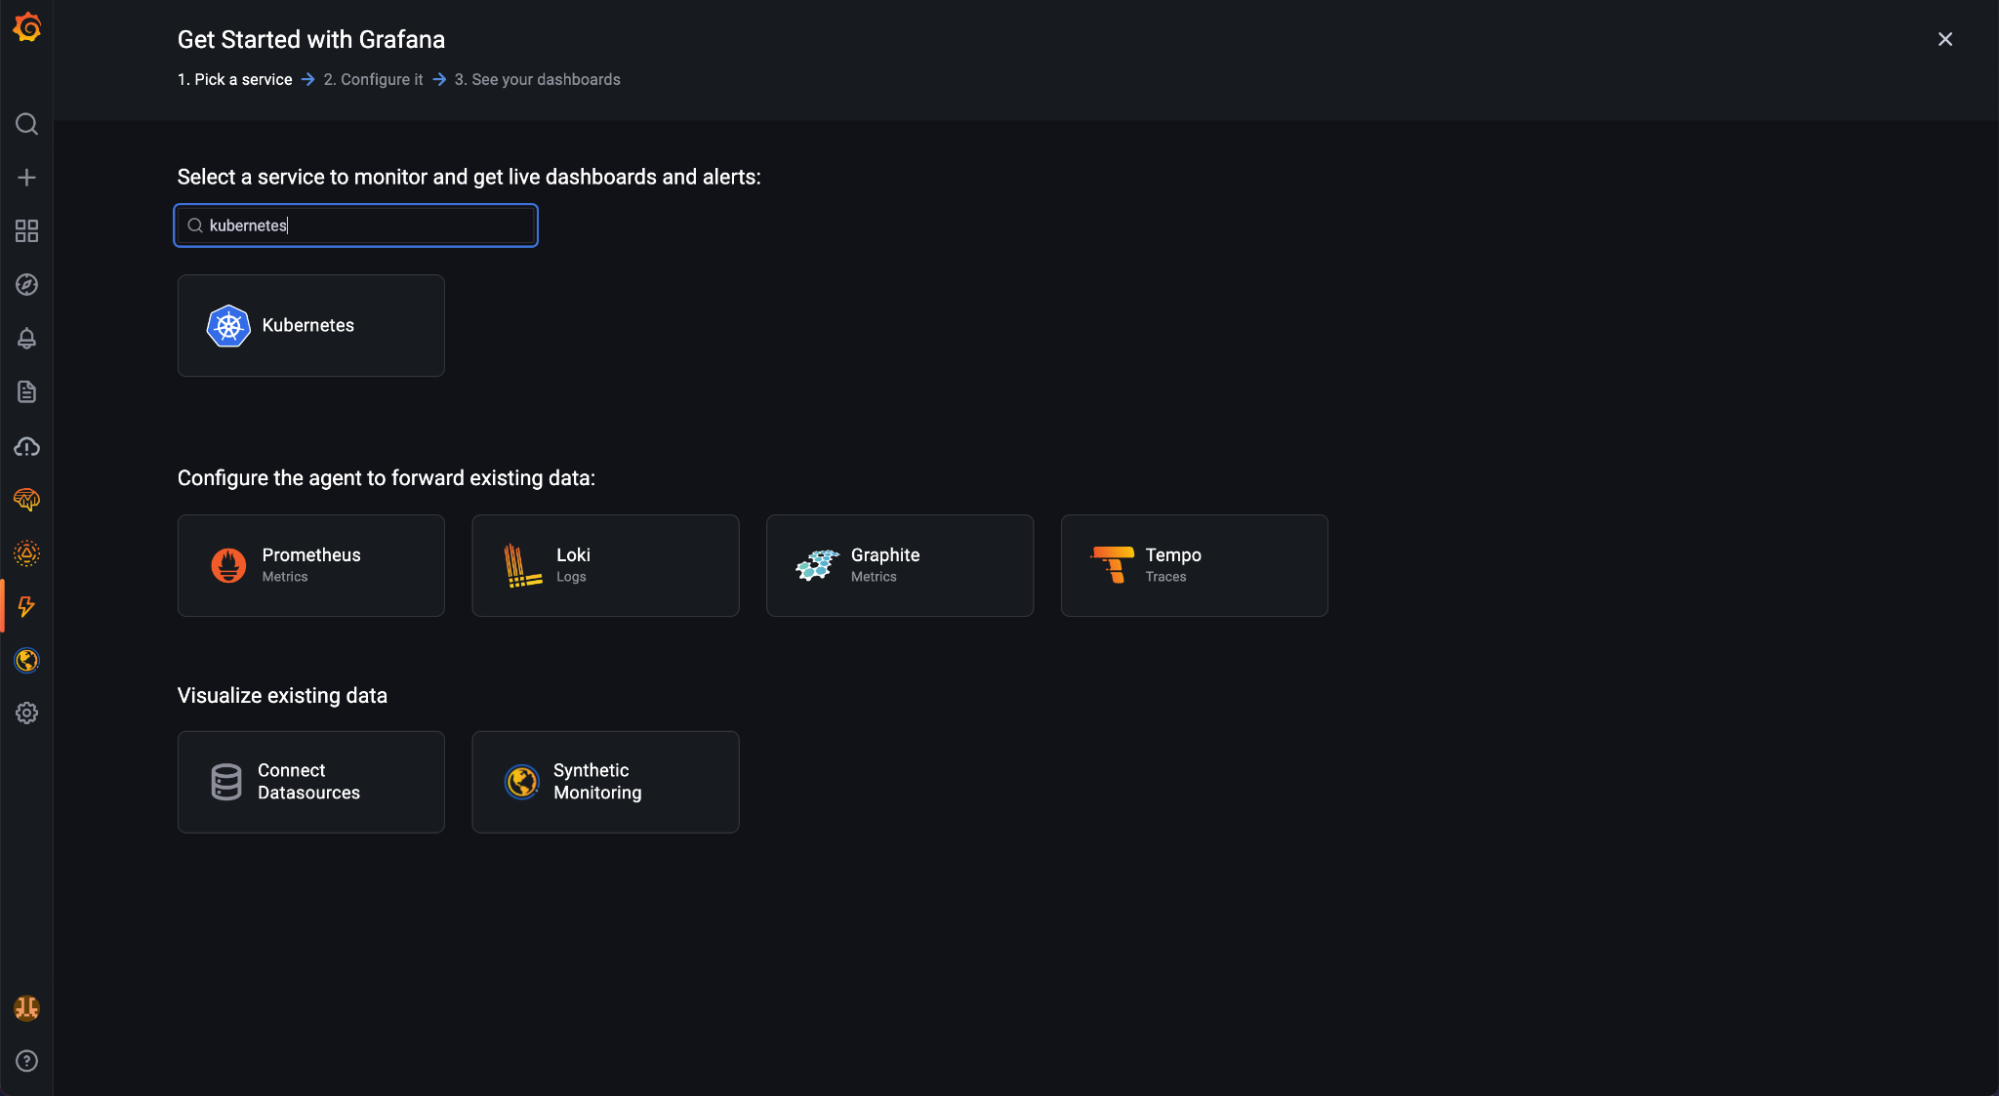 Search for K8s in the Grafana Cloud integrations UI